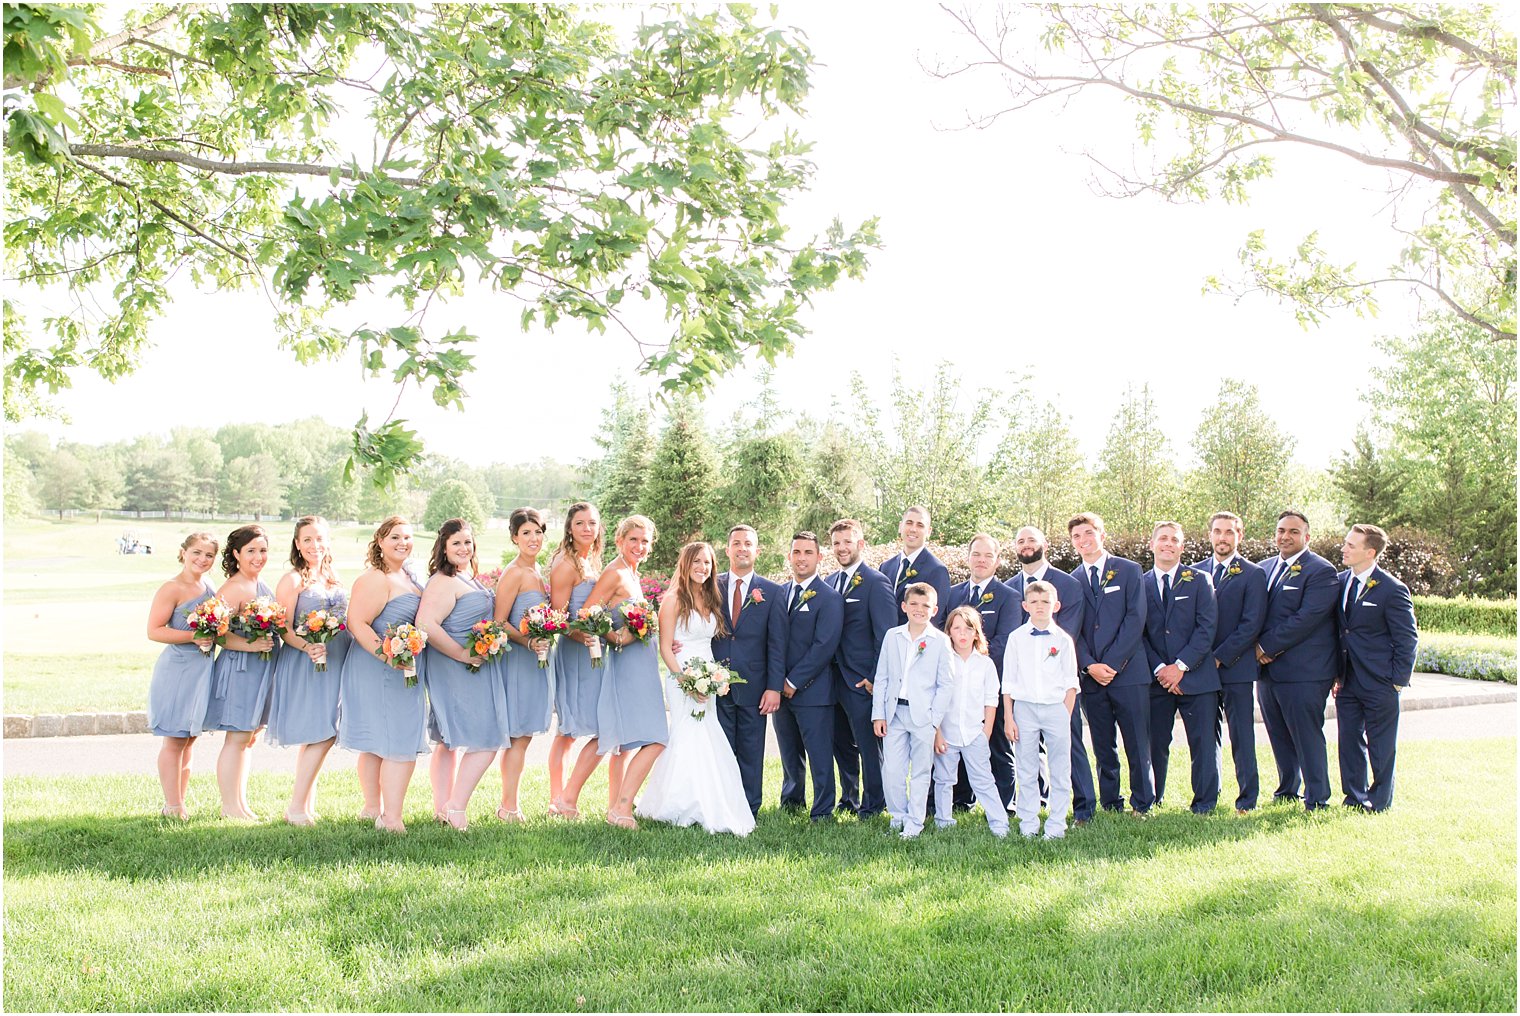 Bridal party Photo at Eagle Oaks Country Club